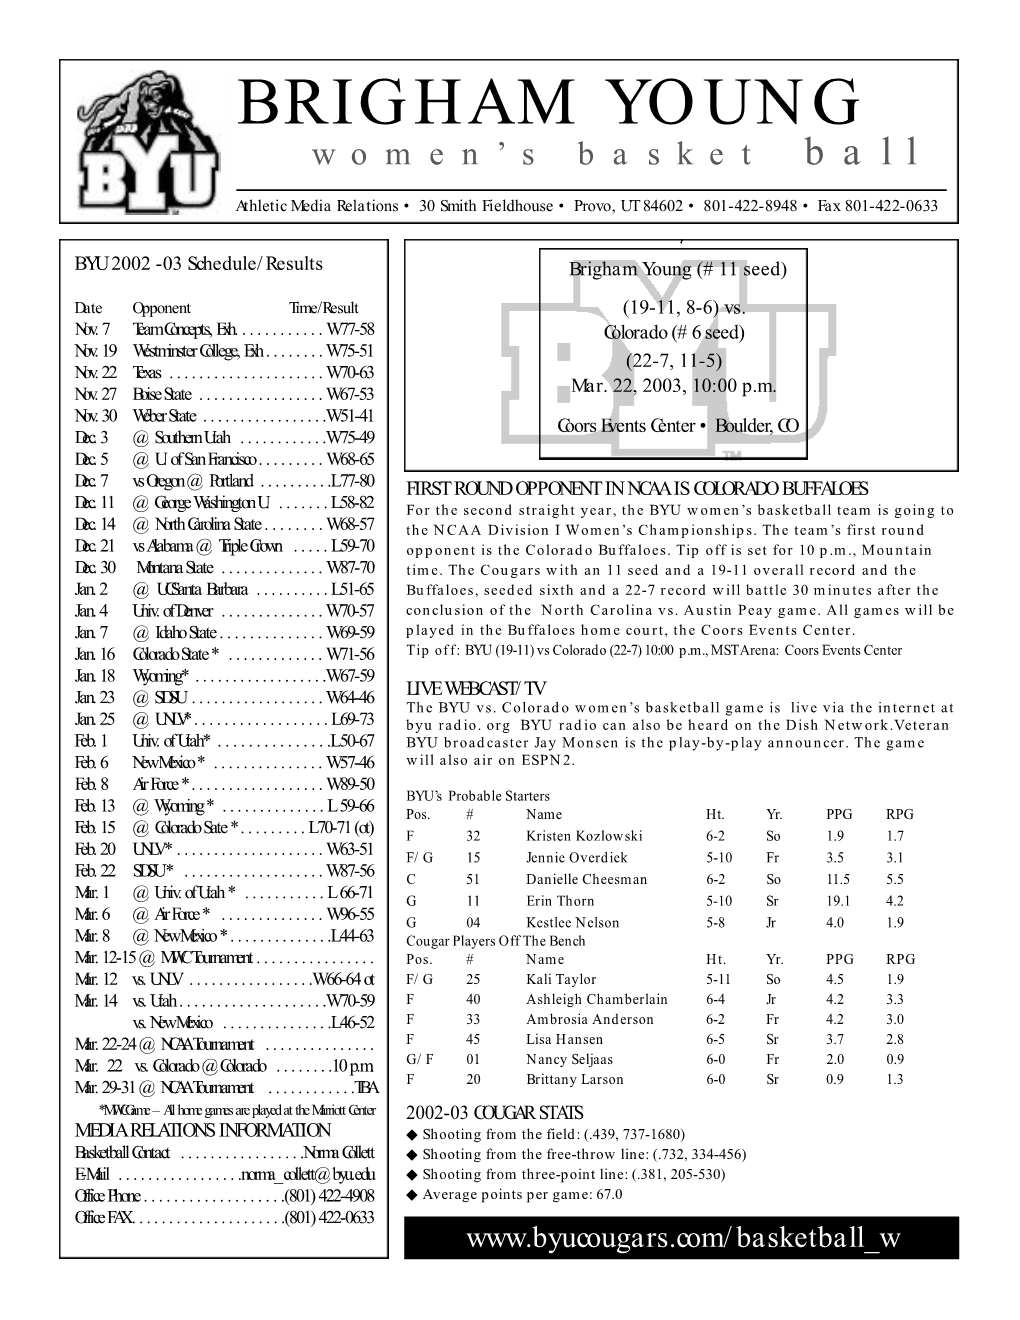 W-Basketball 2 BYU in the NUMBERS BYU Basketball INFORMATION ◆ (9) - Different Starting Lineups for the Cougar Team This Season Head Coach